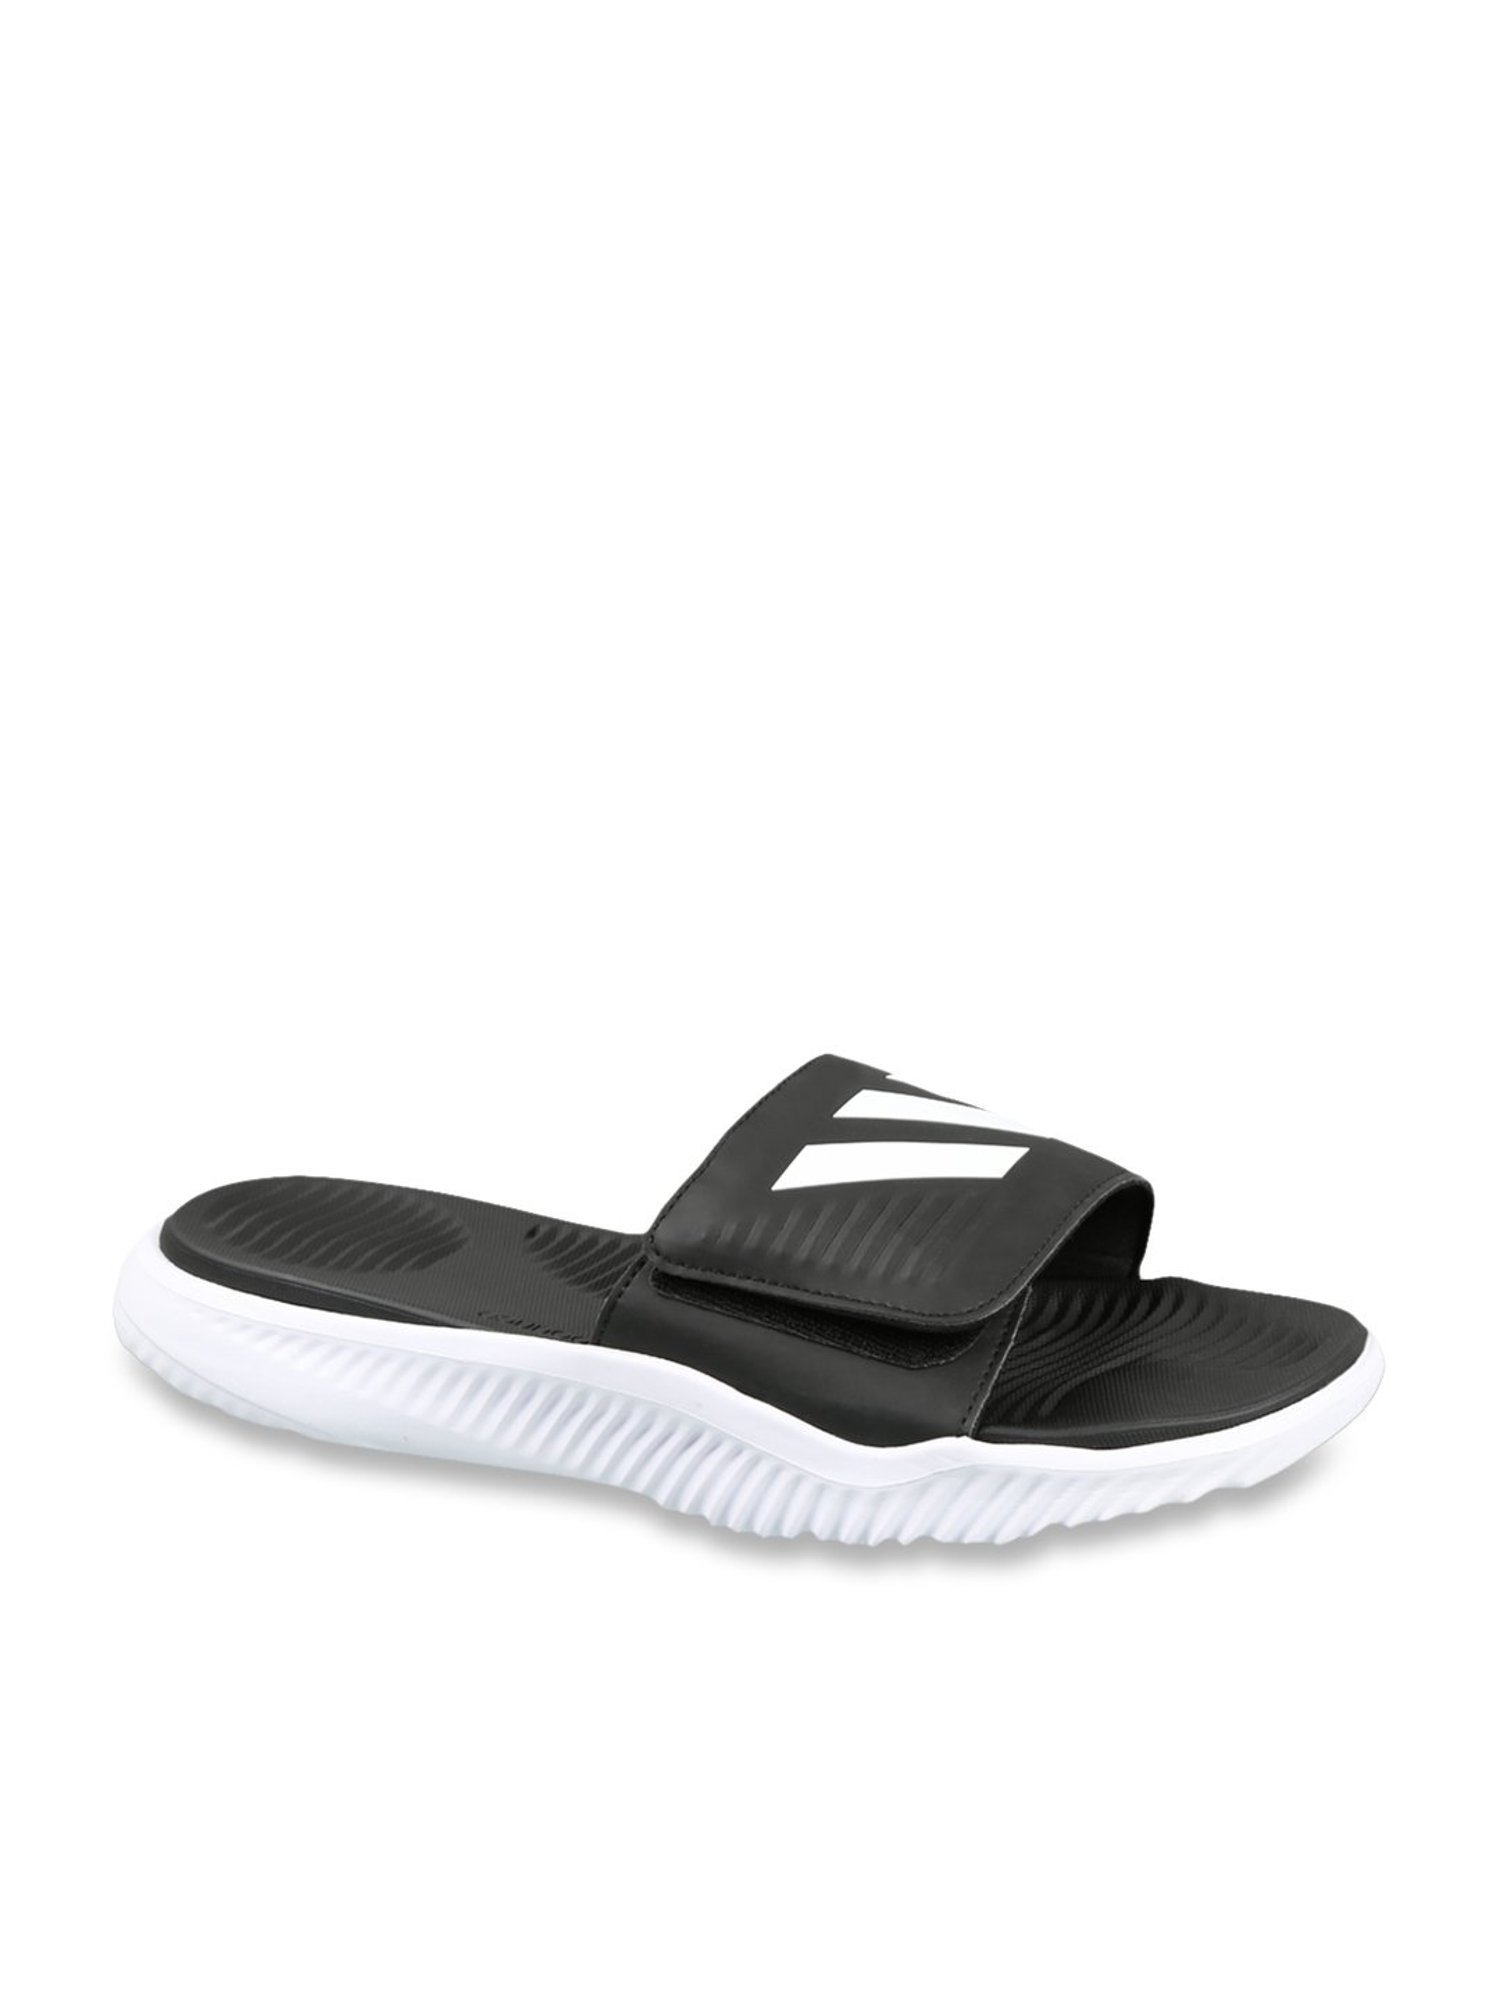 Buy Adidas Bounce BB Black Casual Sandals for Men at Best Price @ CLiQ